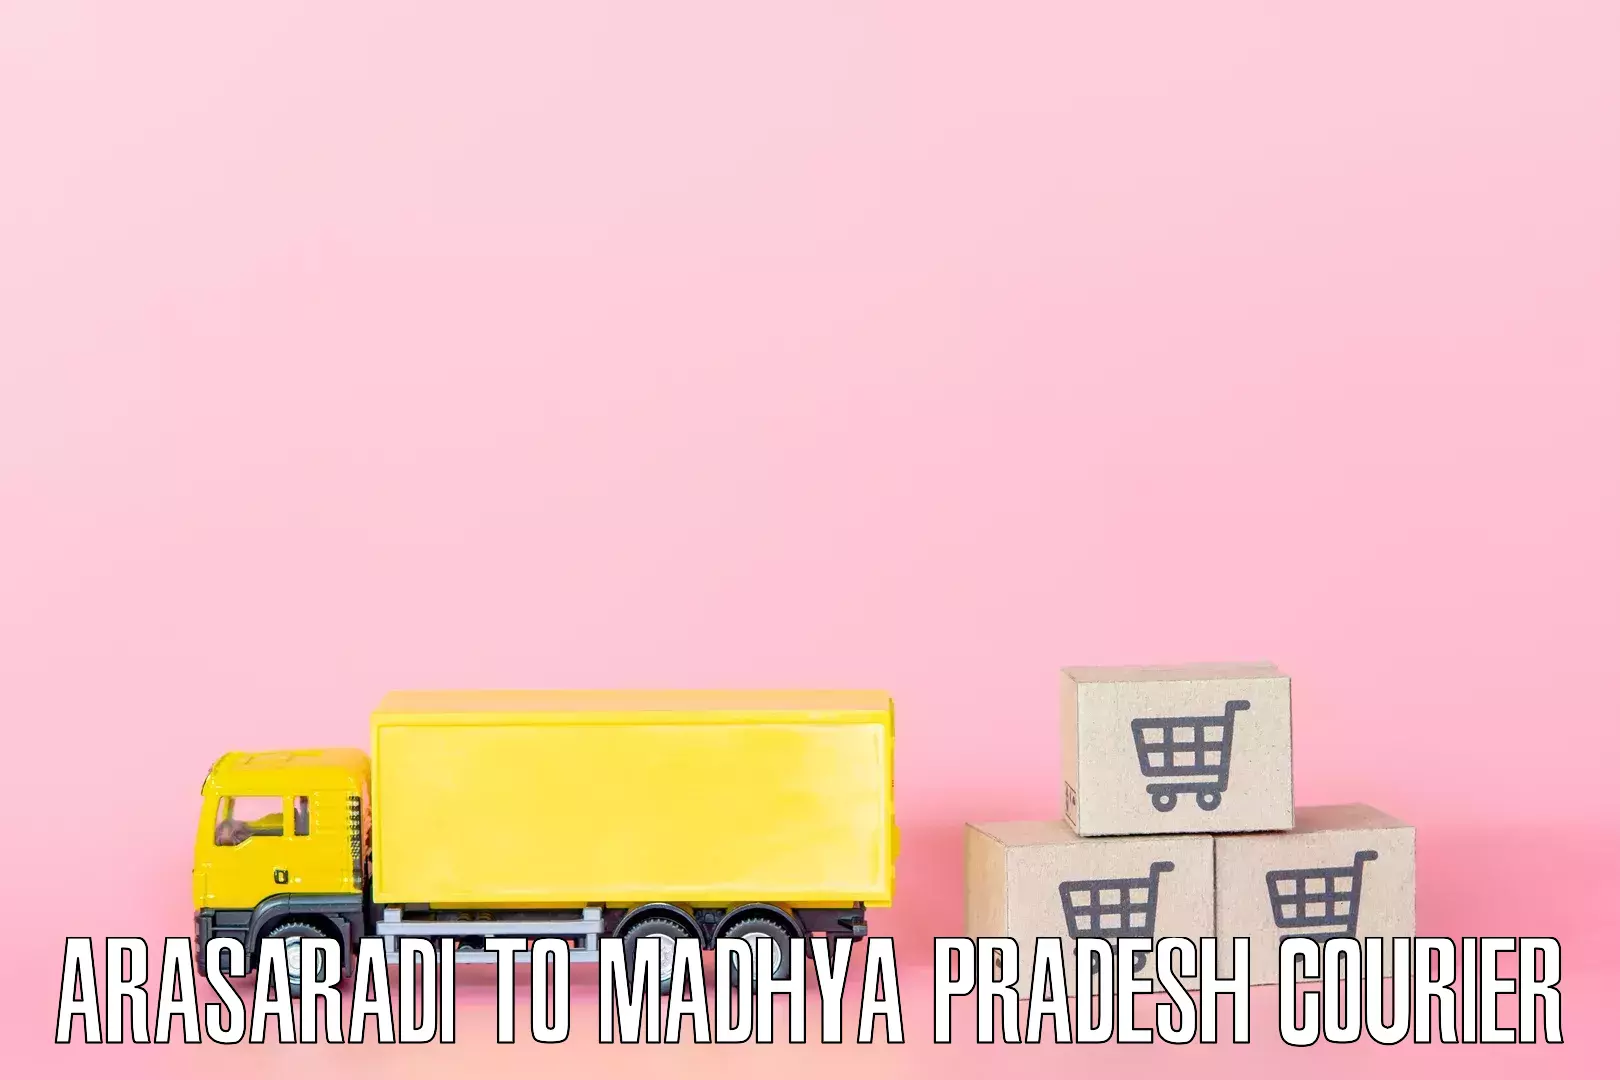 Comprehensive moving services Arasaradi to Indore